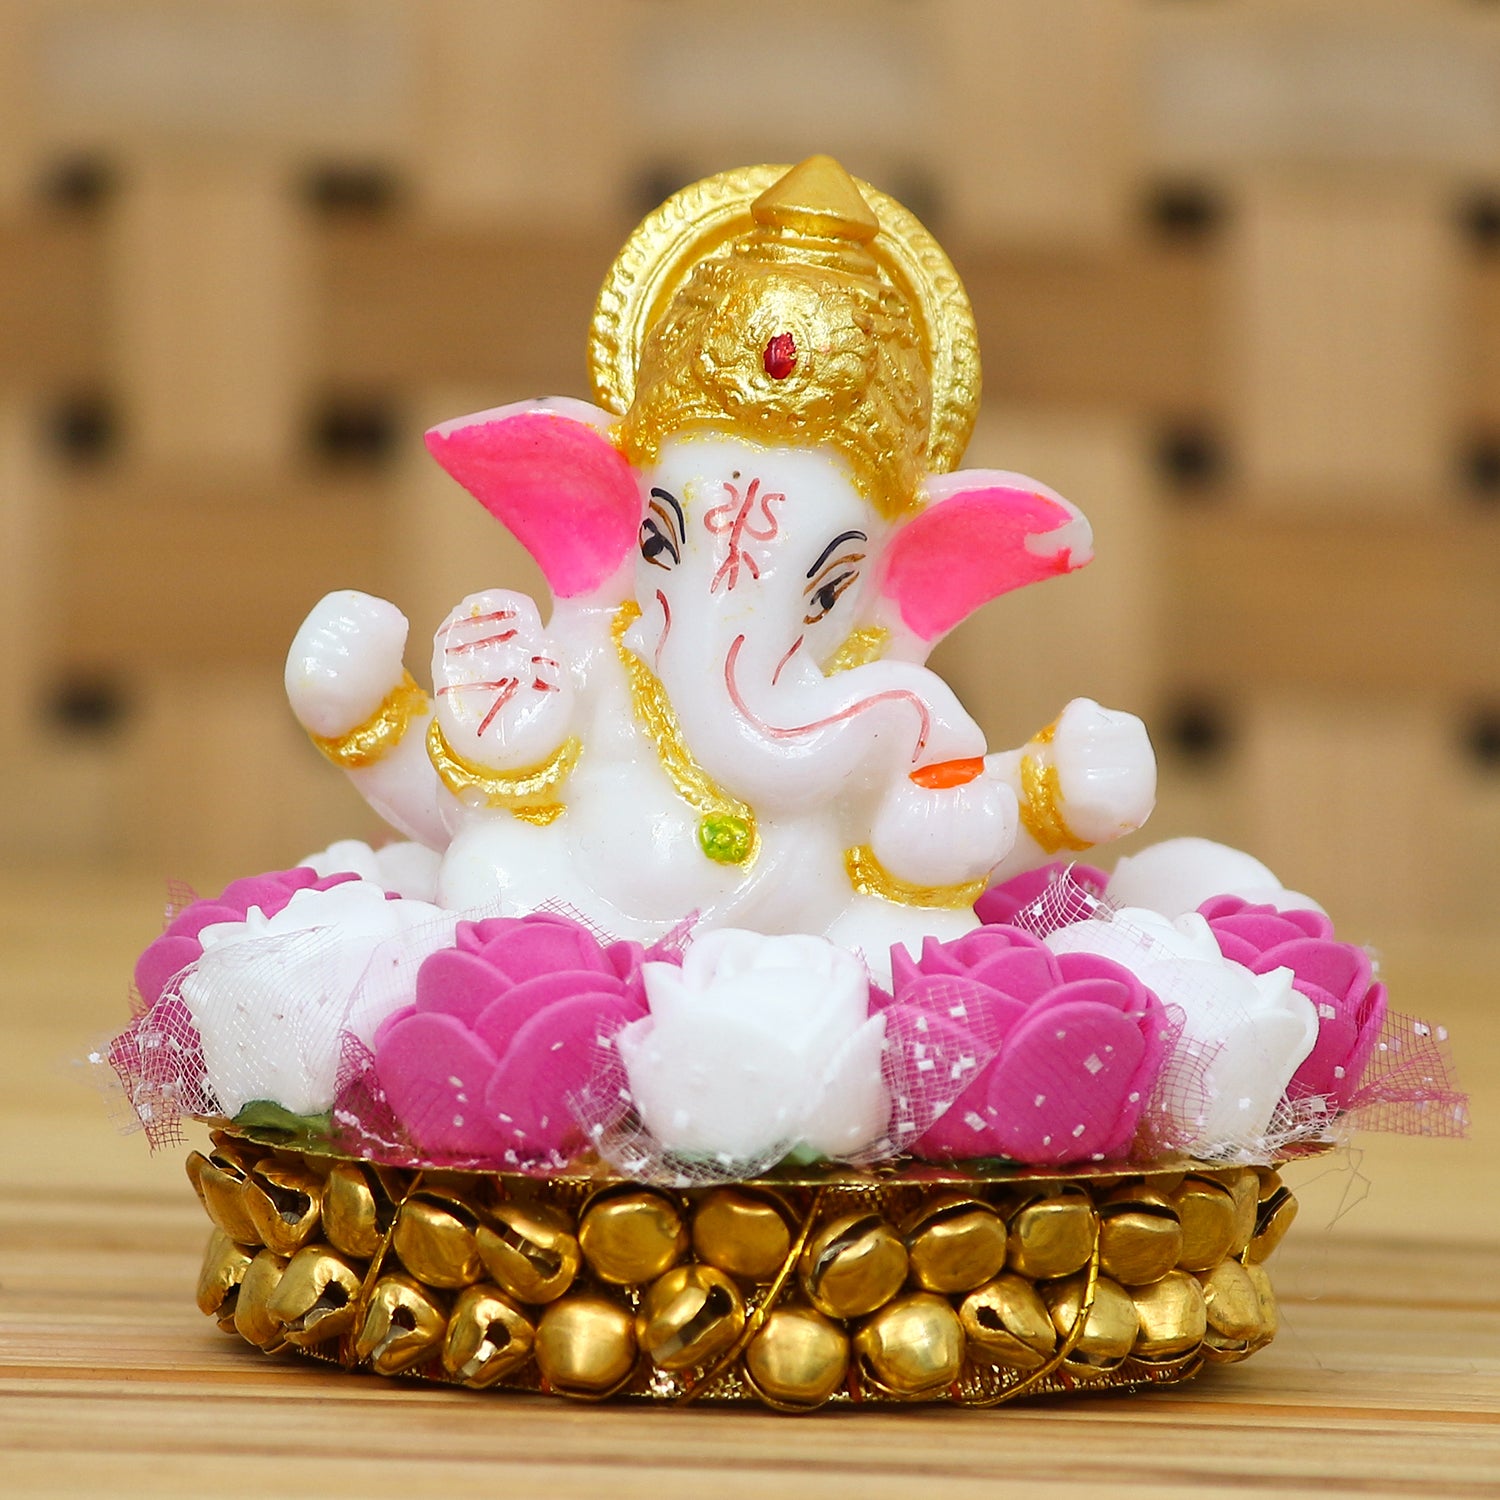 Golden and White Polyresin Lord Ganesha Idol on Decorative Handcrafted Plate with Pink and White Flowers 1